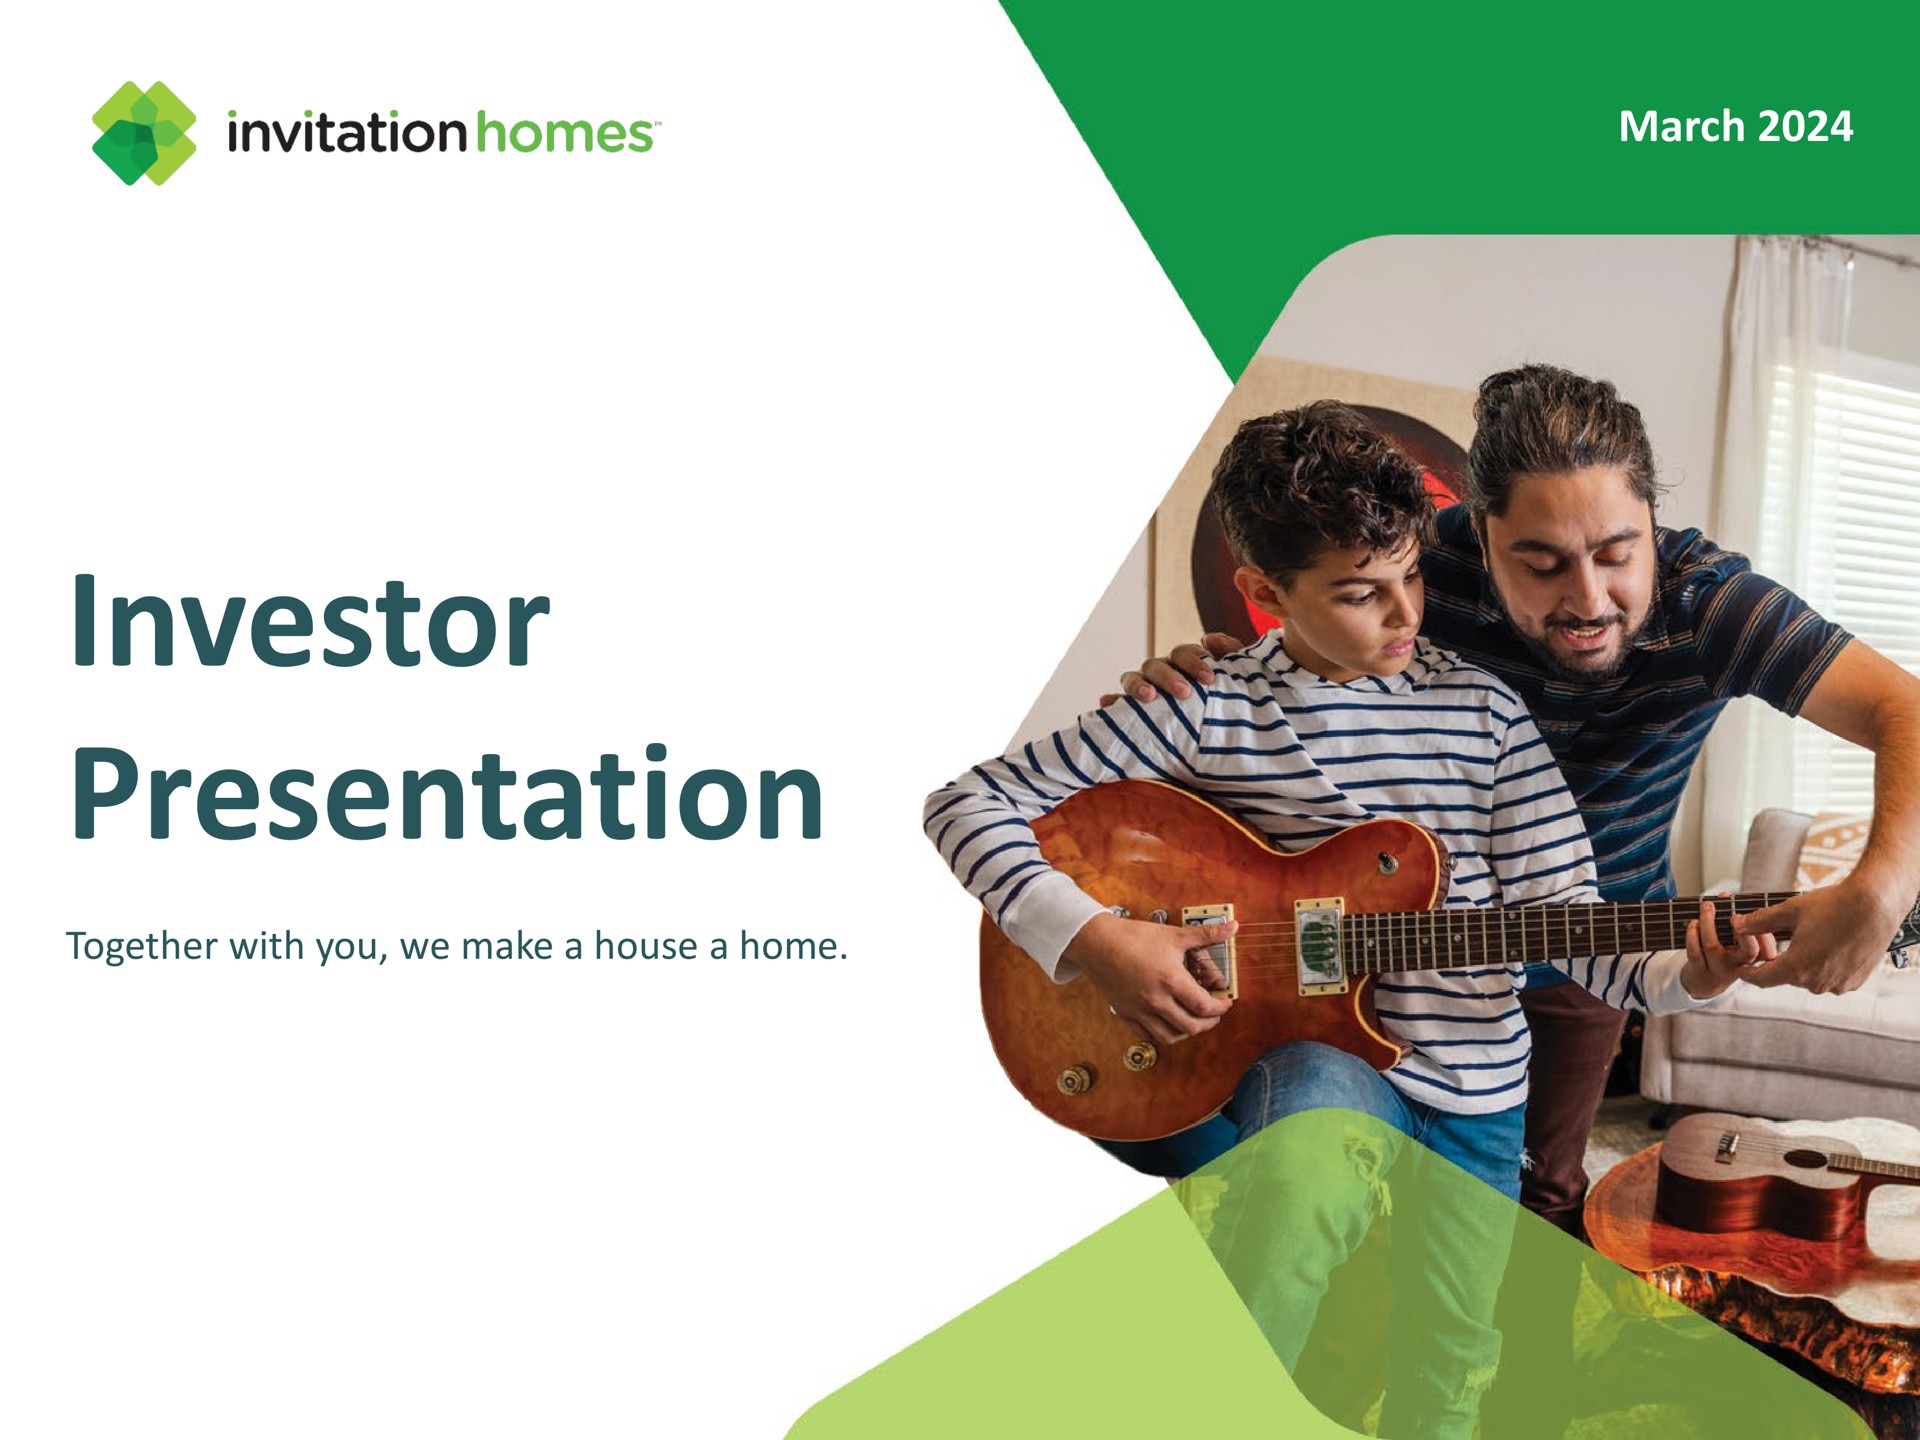 march investor presentation together with you we make a house a home | Invitation Homes